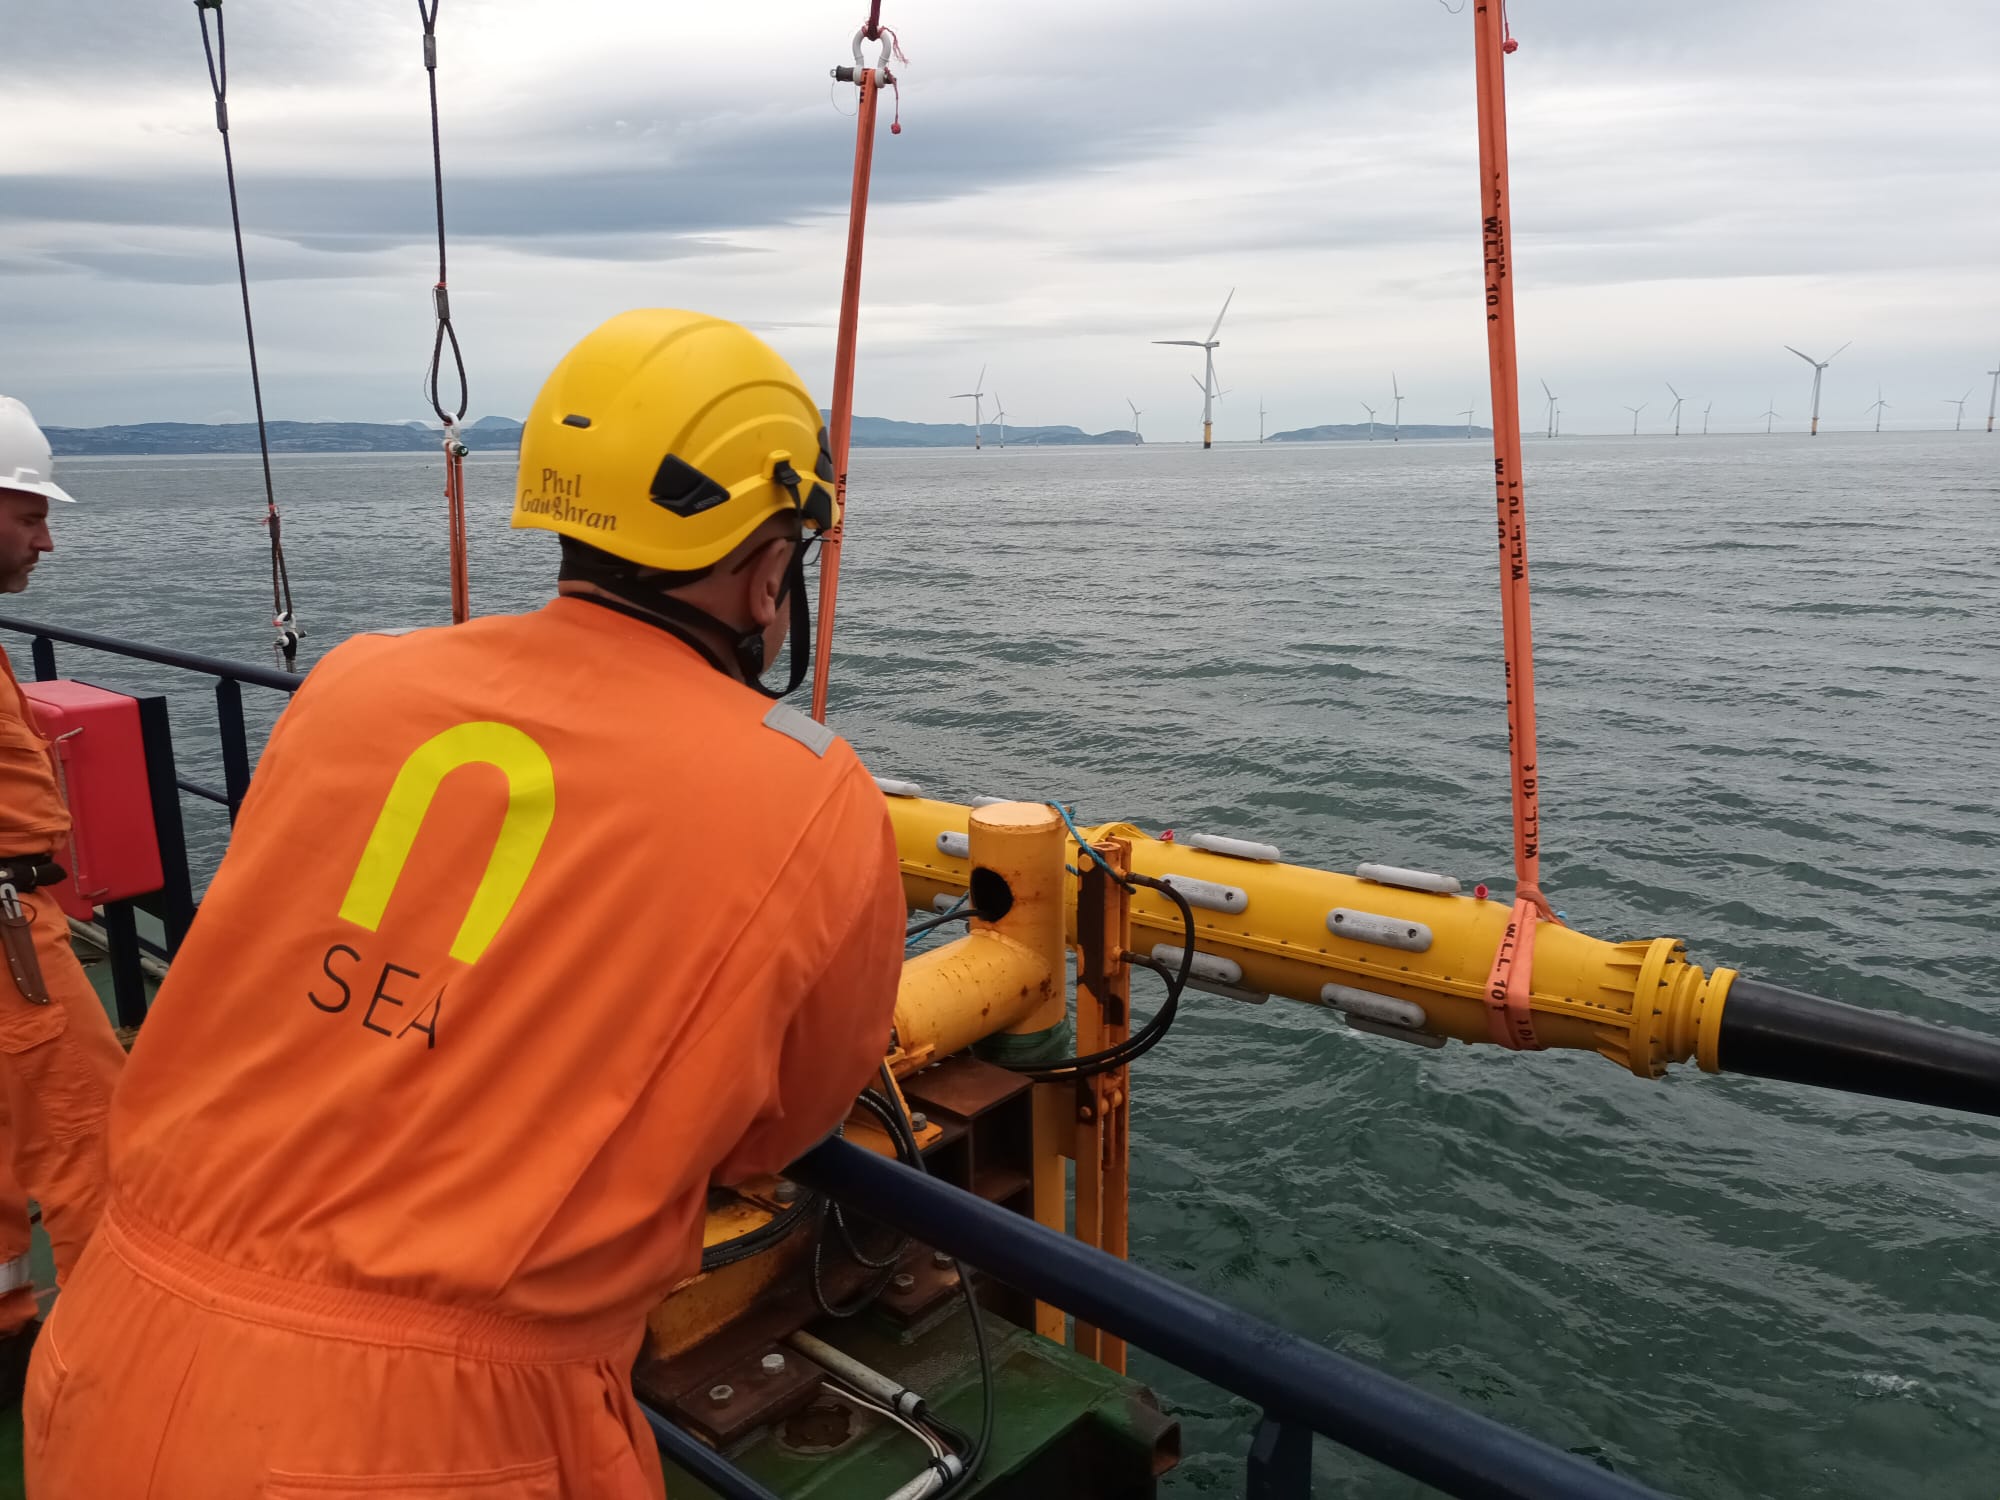 N-Sea successfully completed a pre-emptive repair to Gwynt y Môr ofto subsea export cable 3 (SSEC3)